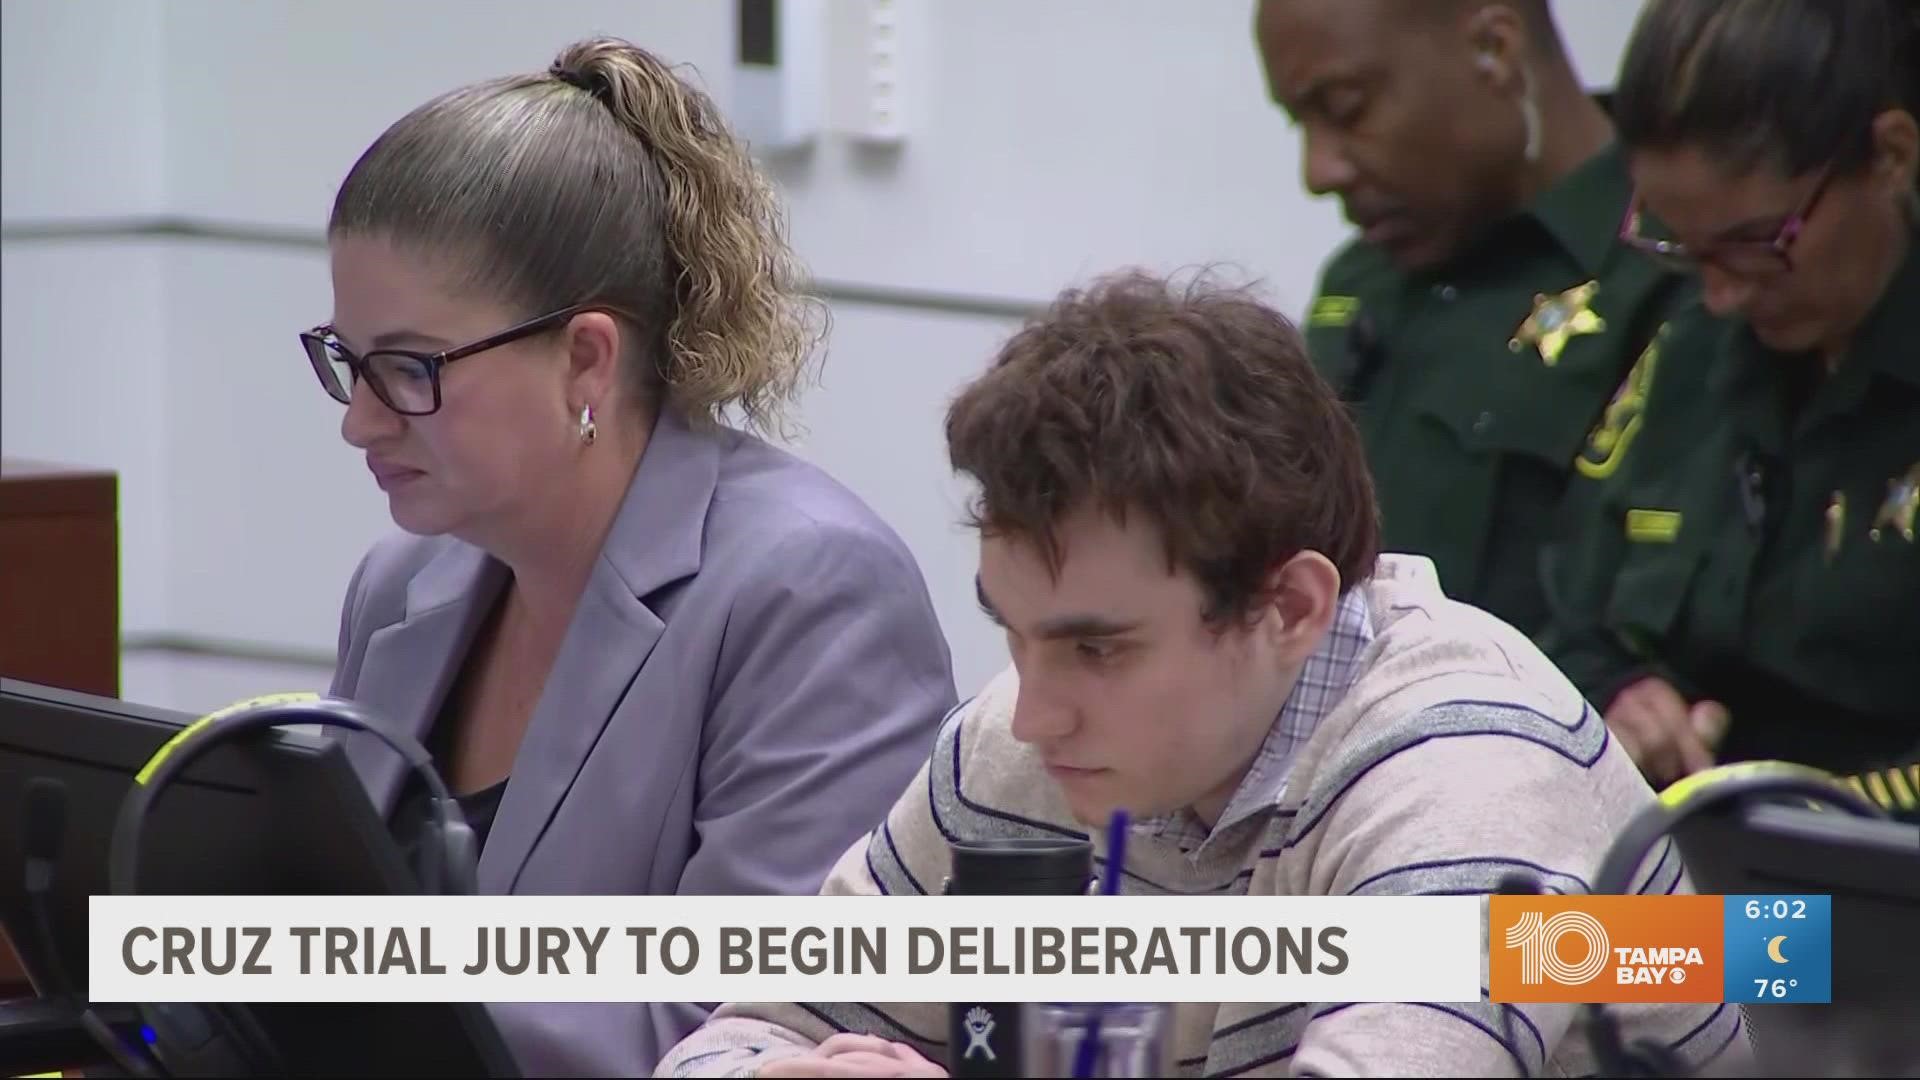 The jury will decide if Nikolas Cruz will spend life in prison or get the death penalty. Deliberations could last hours or days — no one knows.